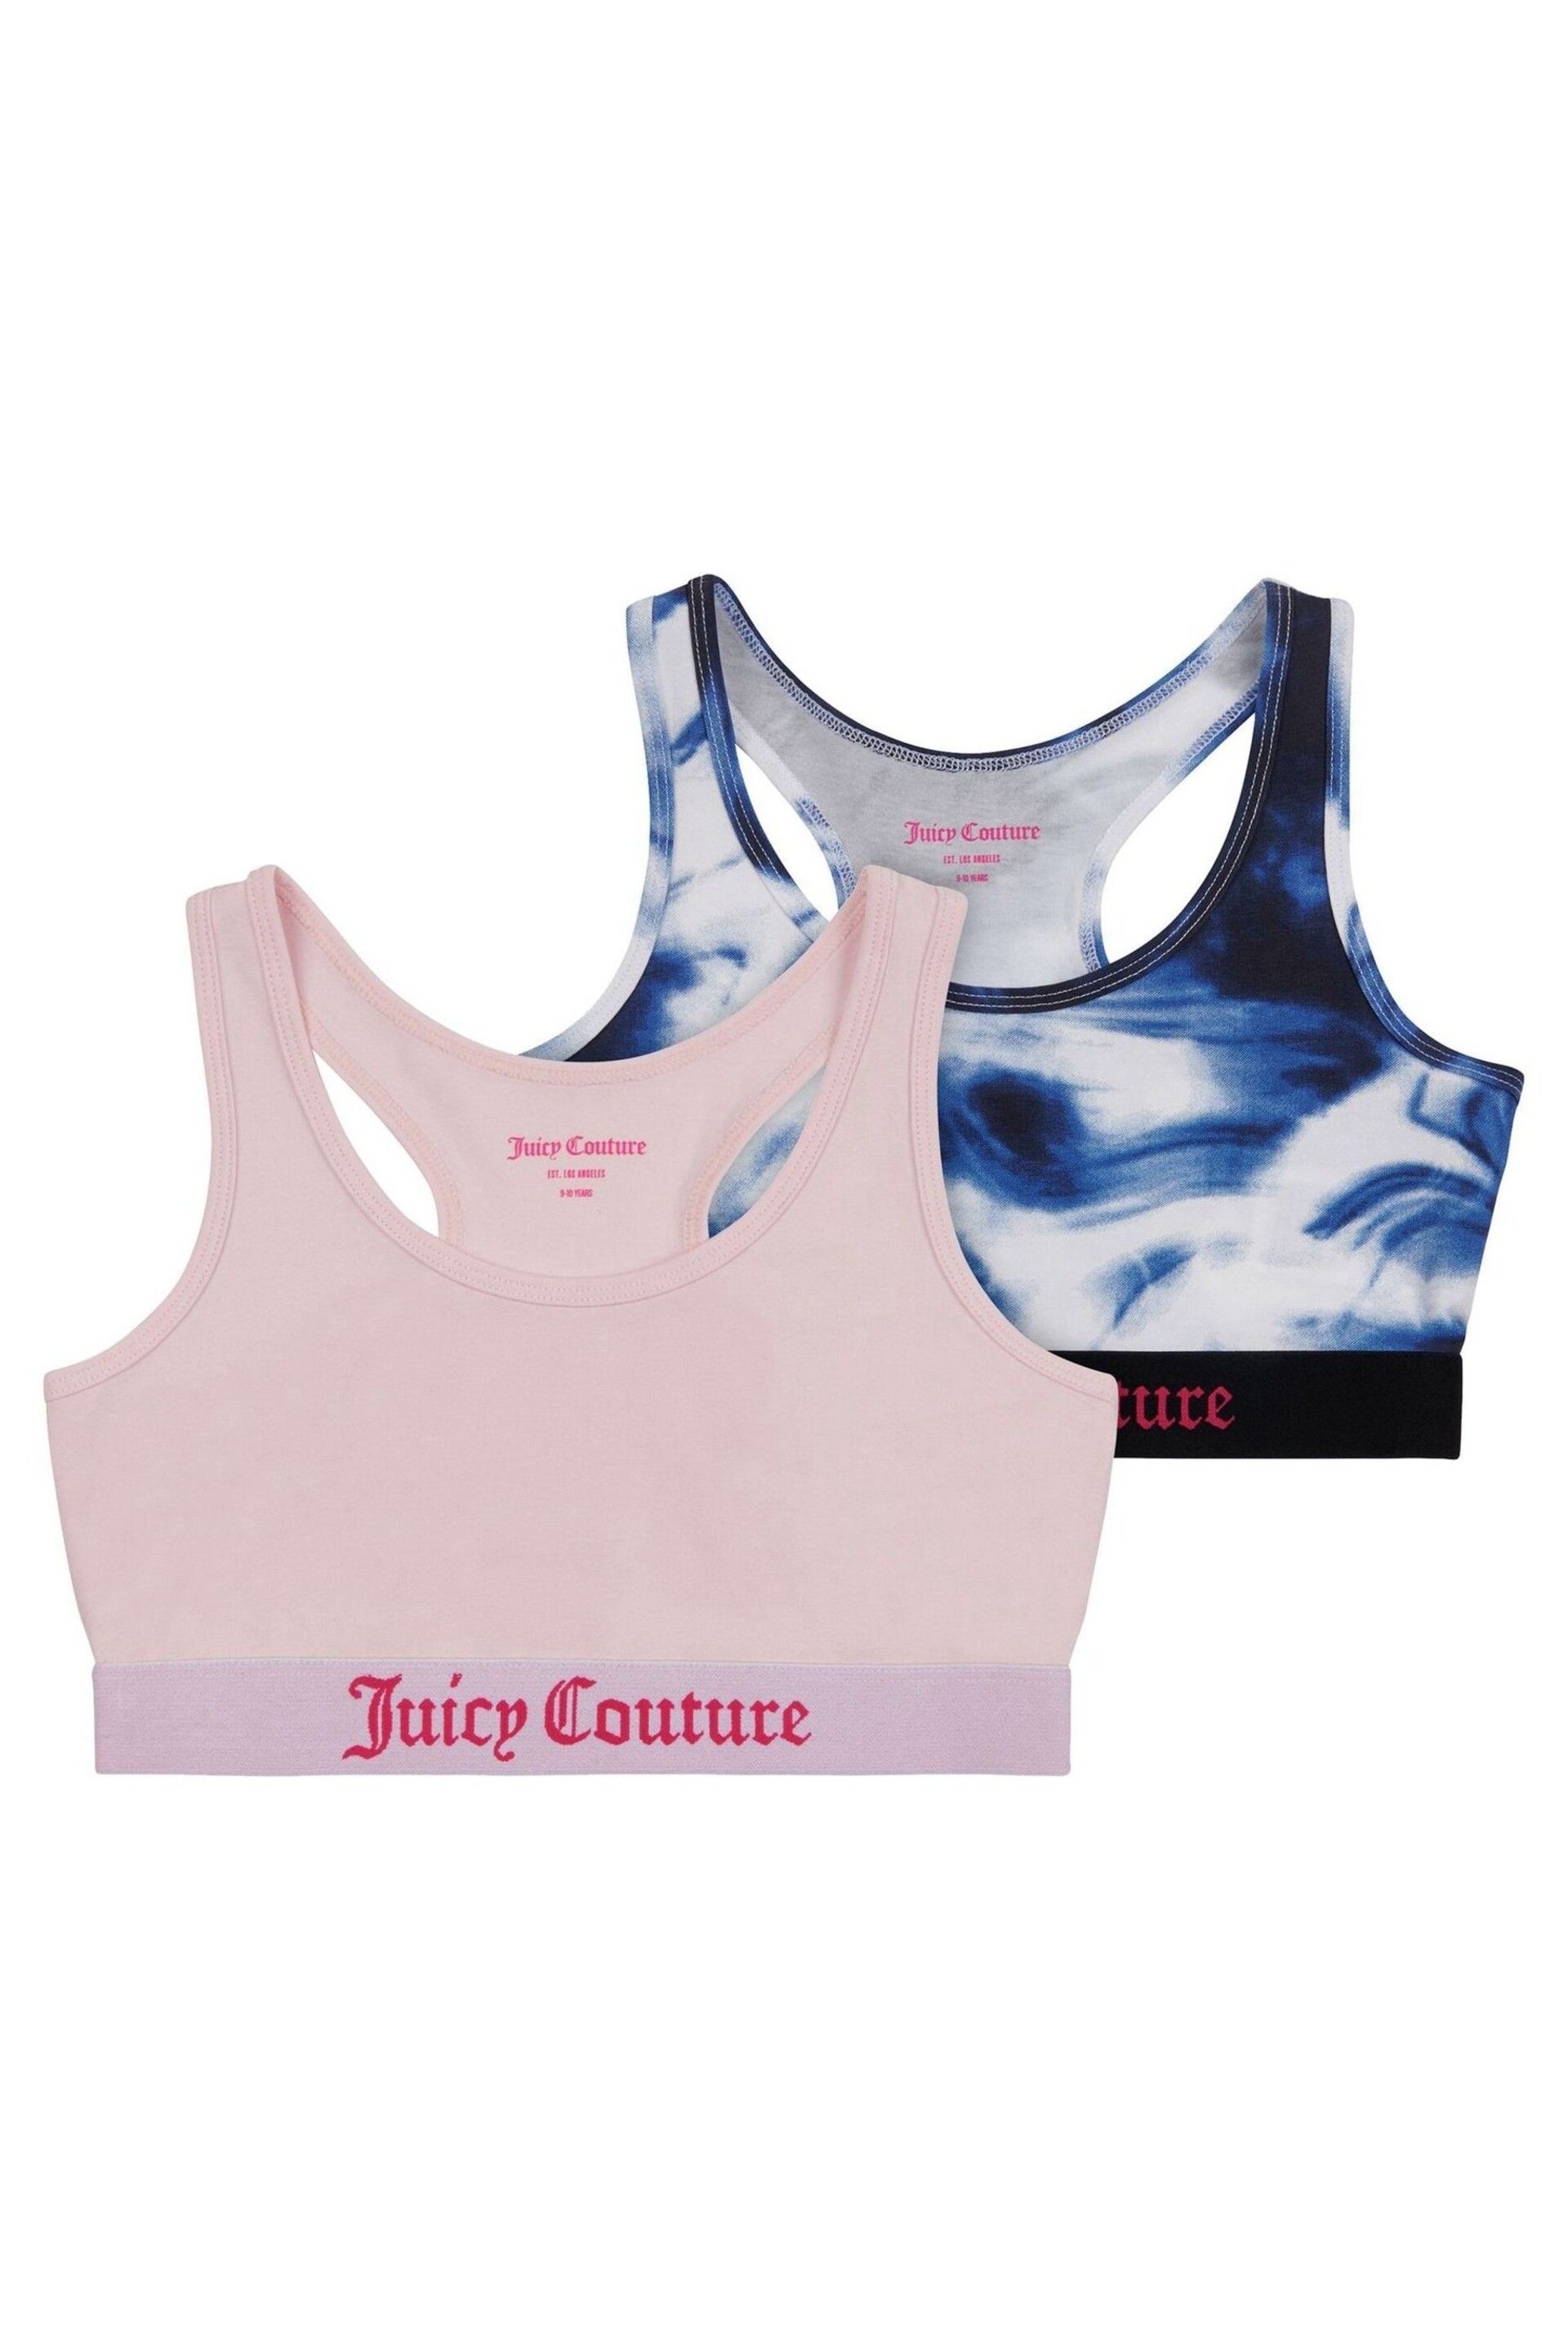 Juicy Couture Girls Blue Crop Tops 2 Pack - Image 1 of 2